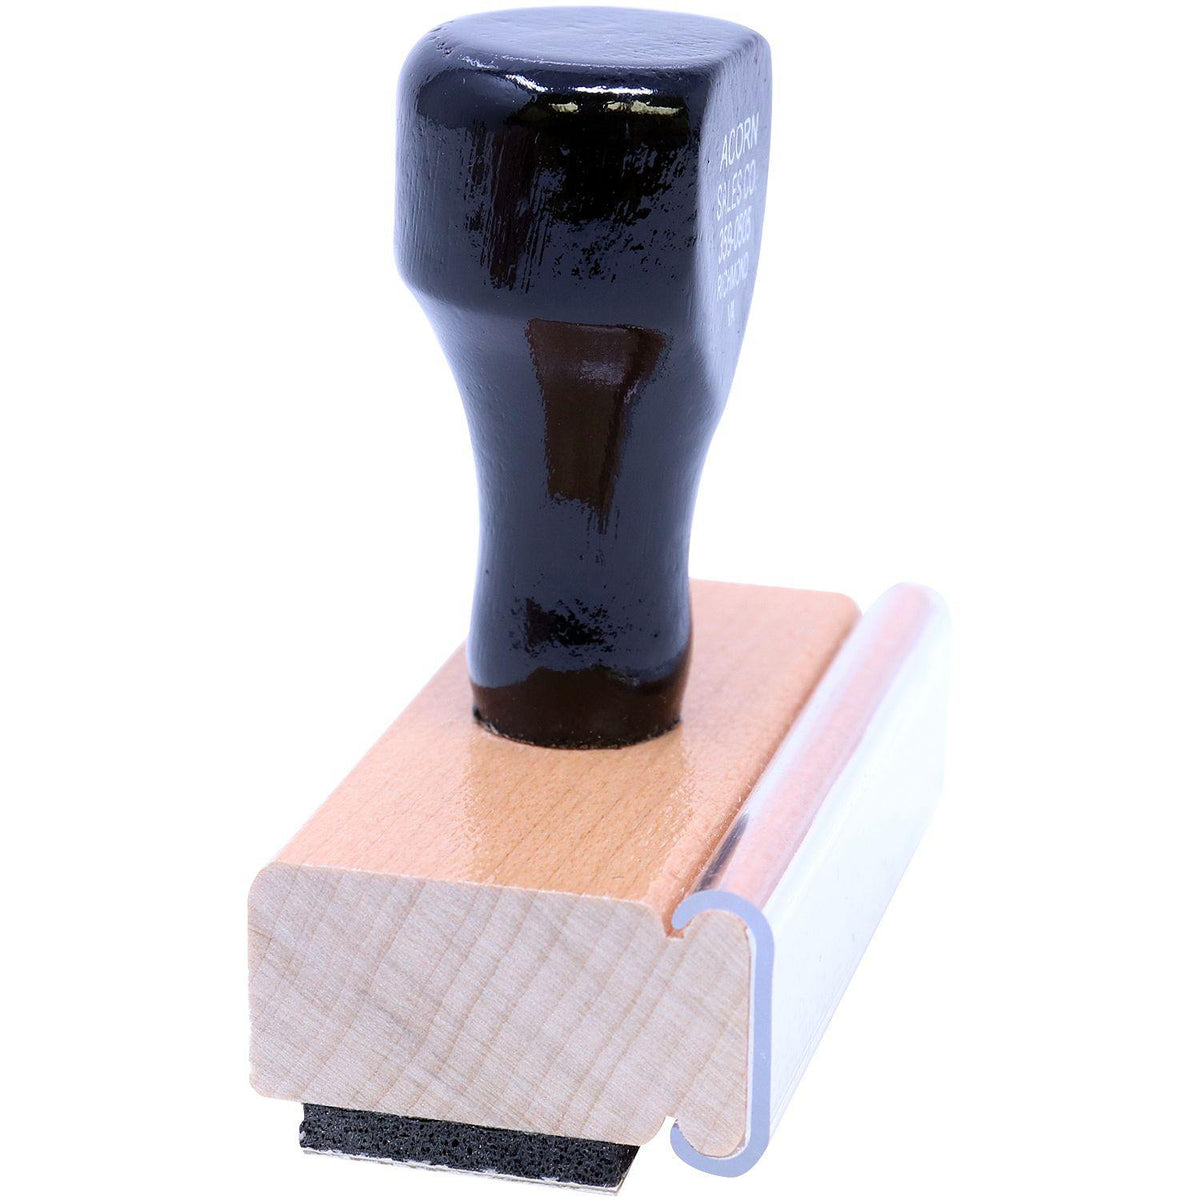 Side View of Large Recycle with Logo Rubber Stamp at an Angle